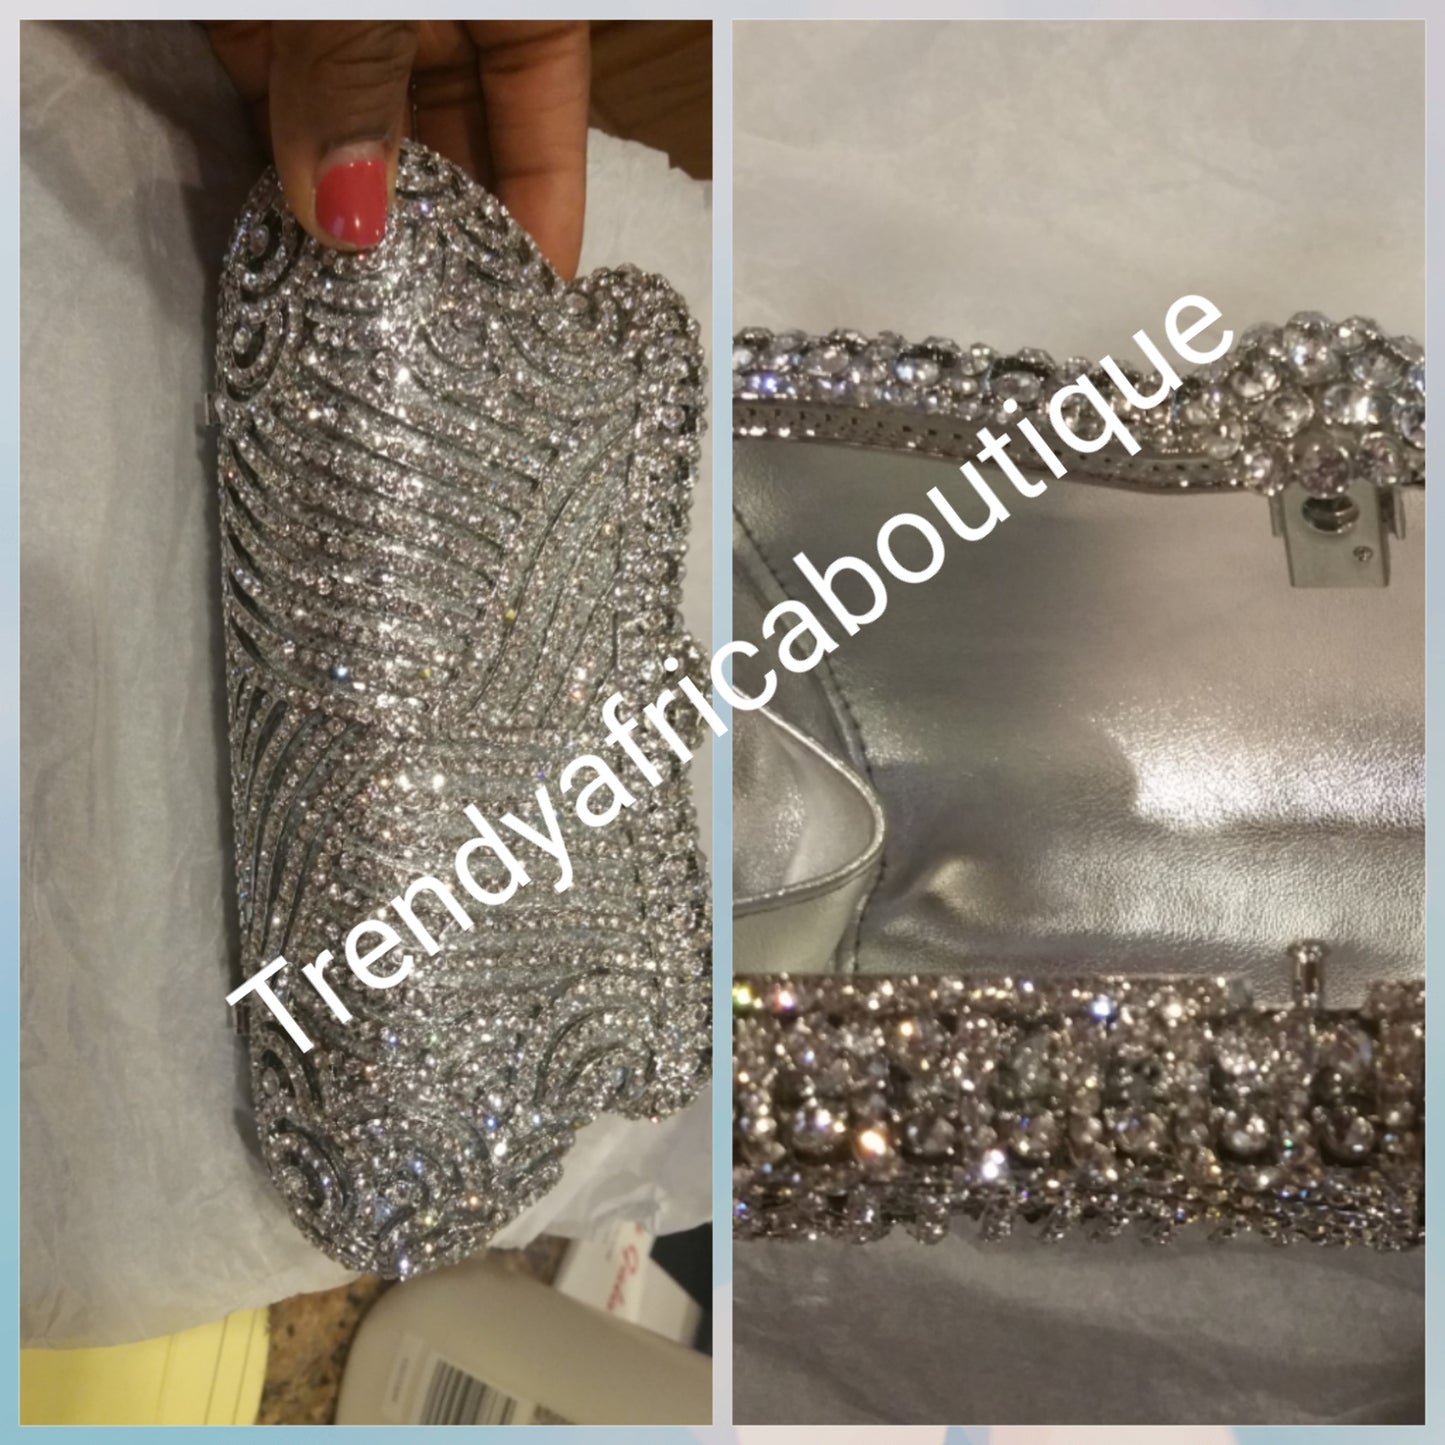 Crystal Clutch/purse sale. Red carpet evening clutch for chics/classic babe. Hand purse 7.5 long× 6" deep silver color